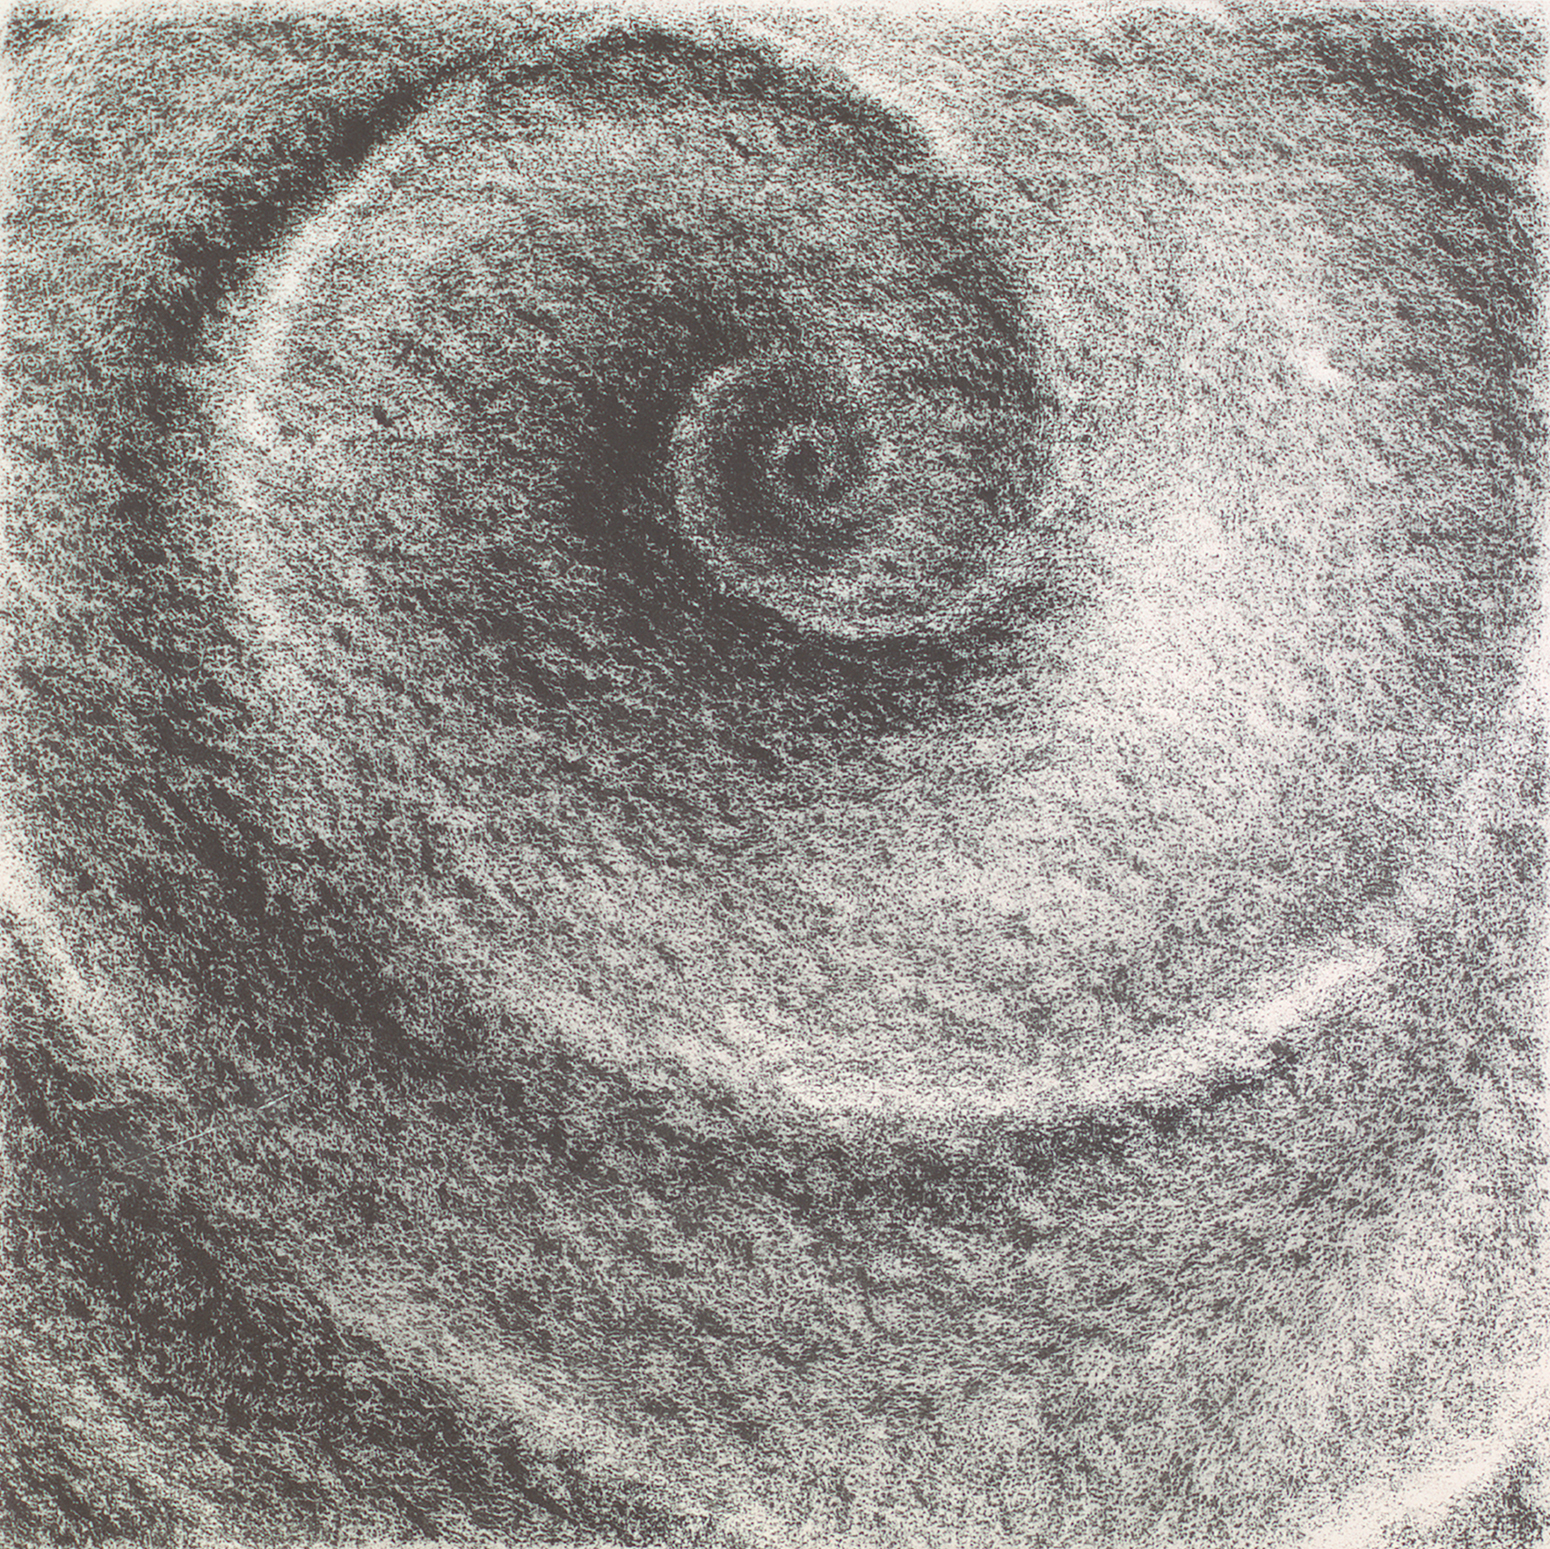 A charcoal drawing of a raised spiral